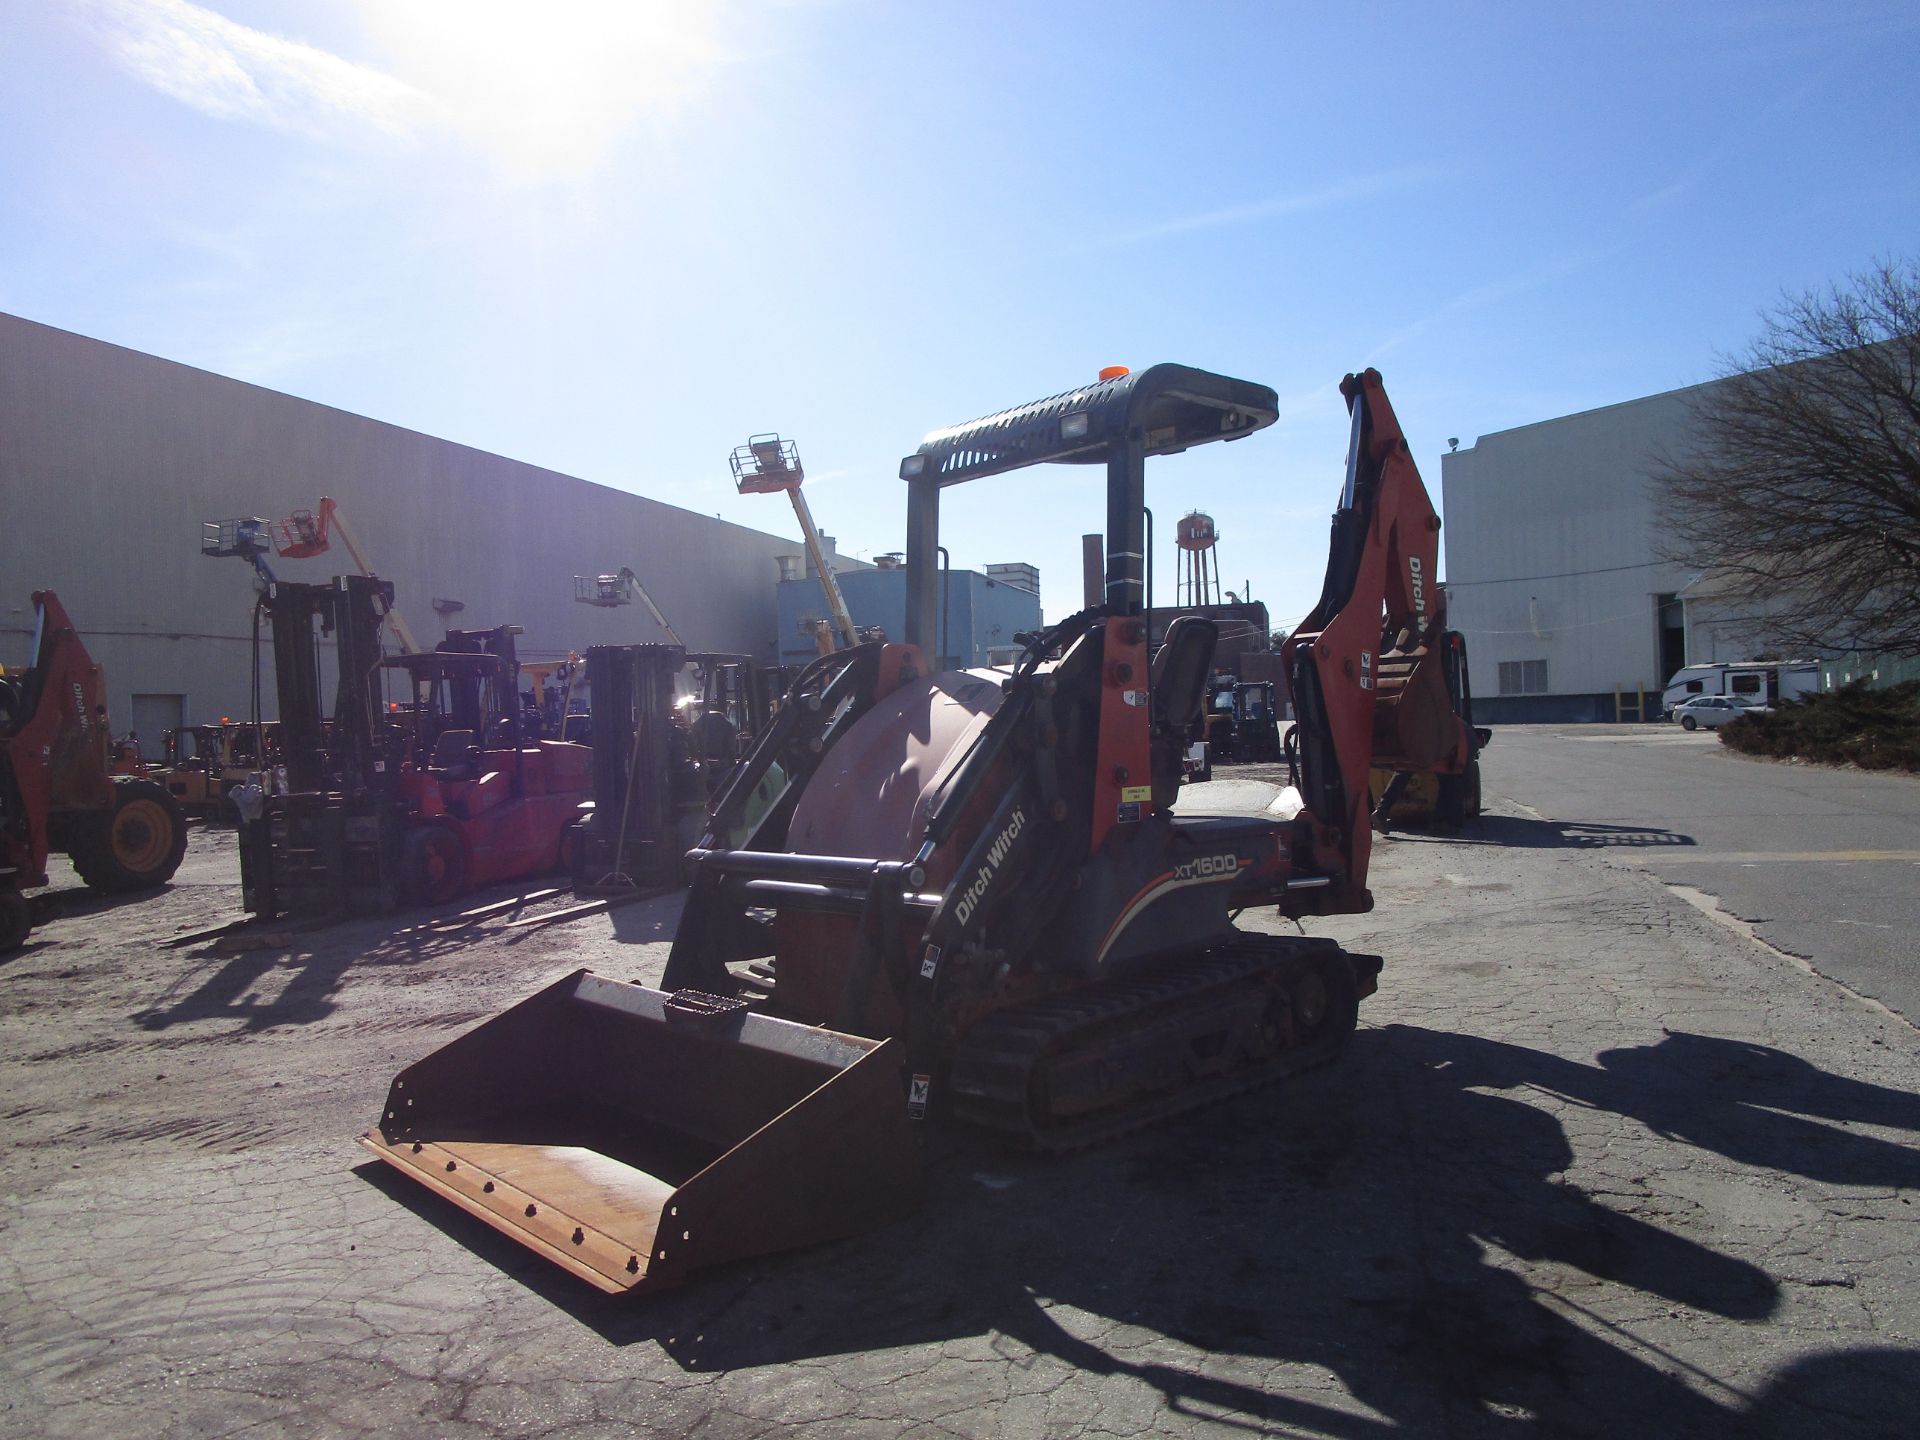 2011 Ditch Witch XT1600 Backhoe with Trailer and Attachments - Image 6 of 24